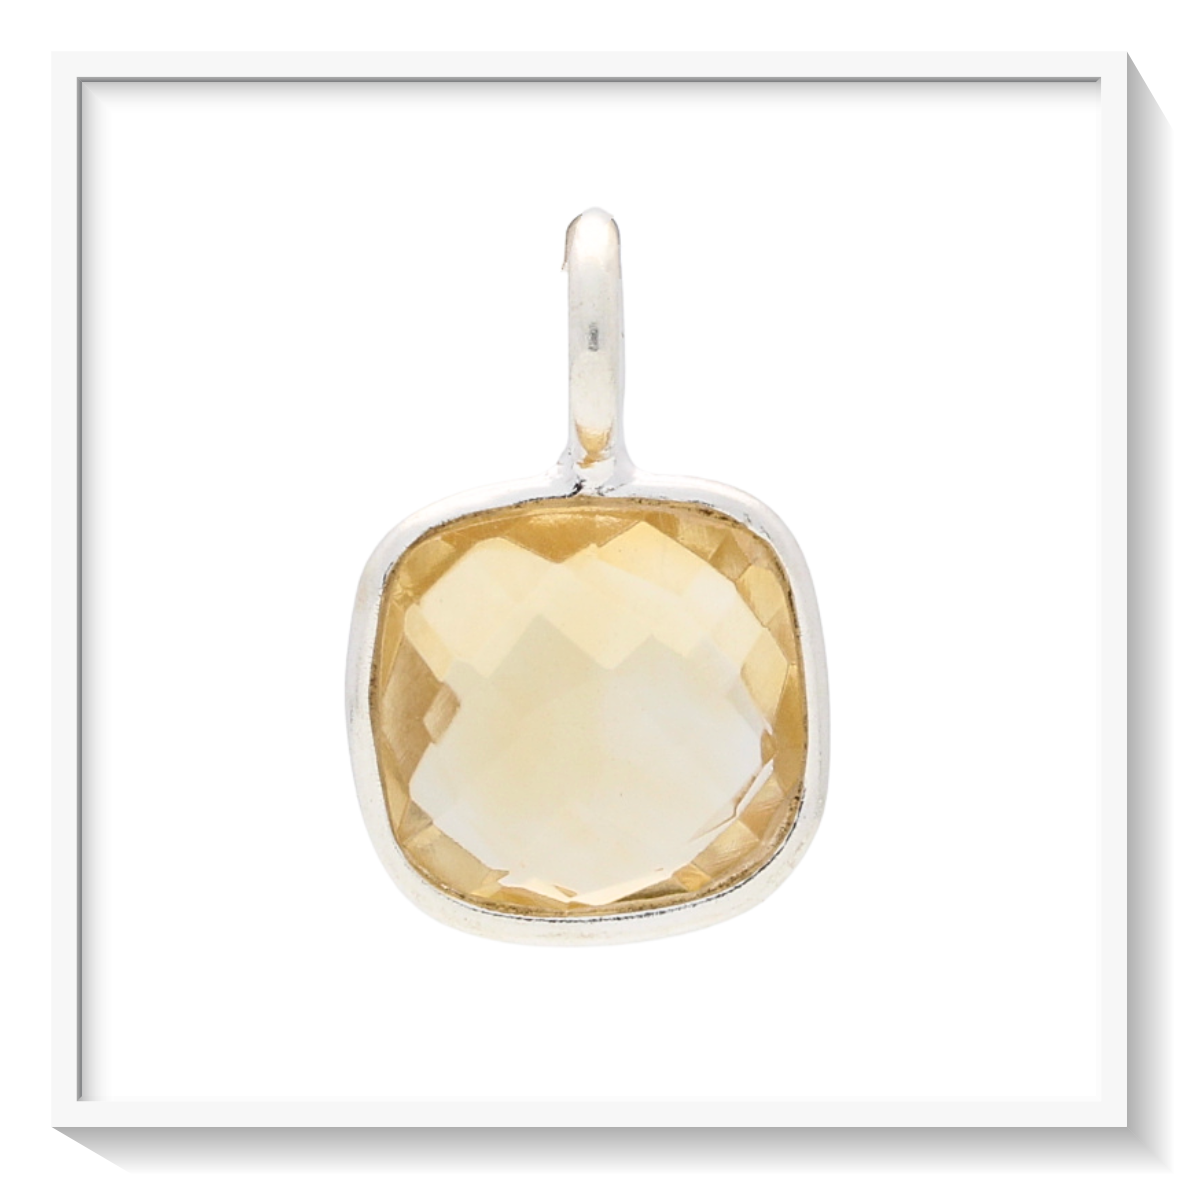 Buy your Citrine Necklace: November Birthstone online now or in store at Forever Gems in Franschhoek, South Africa